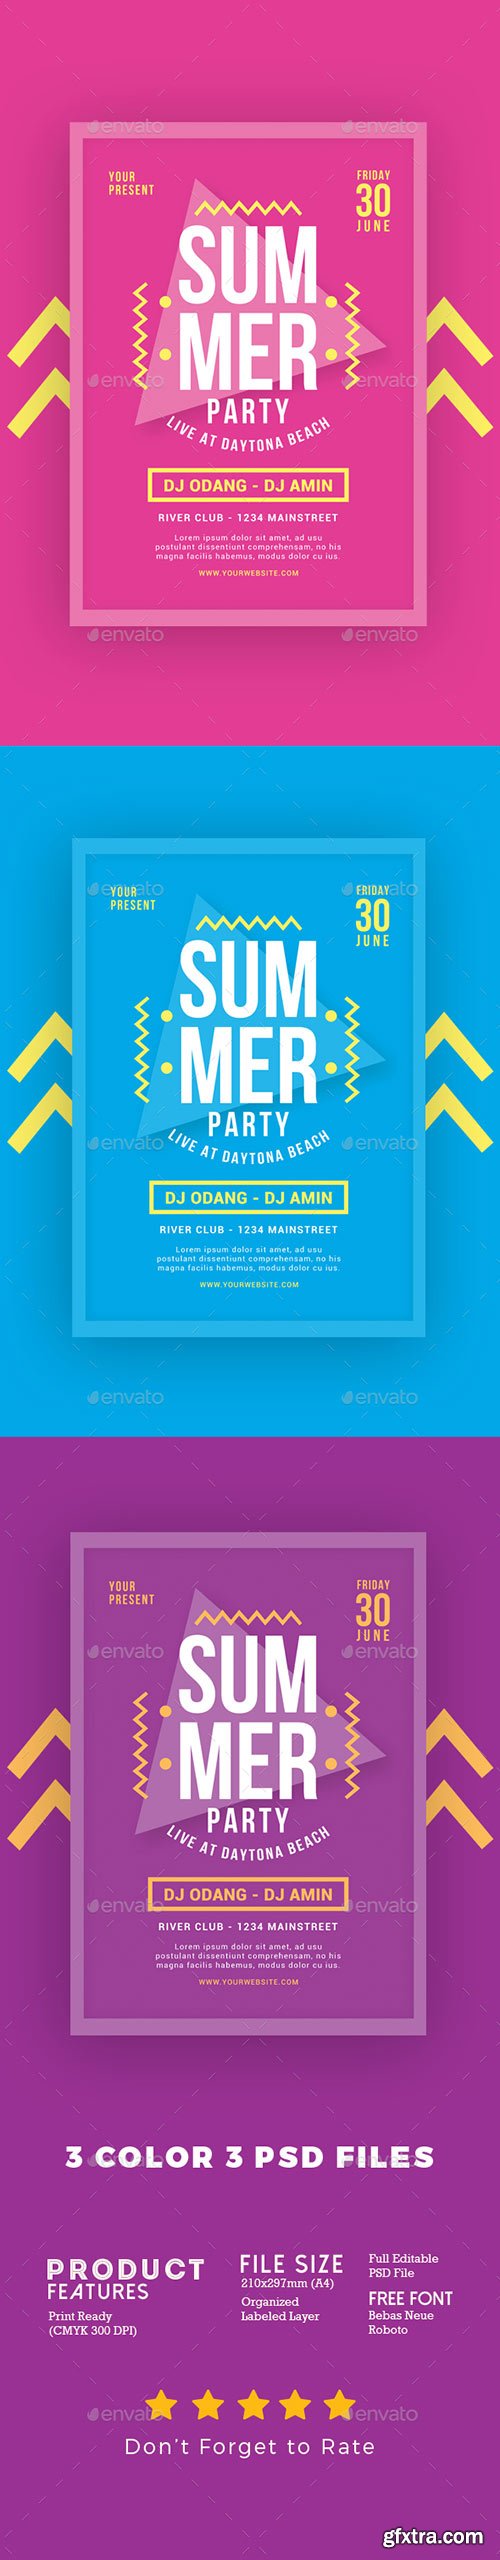 Graphicriver - Summer Party Flyer 20185877